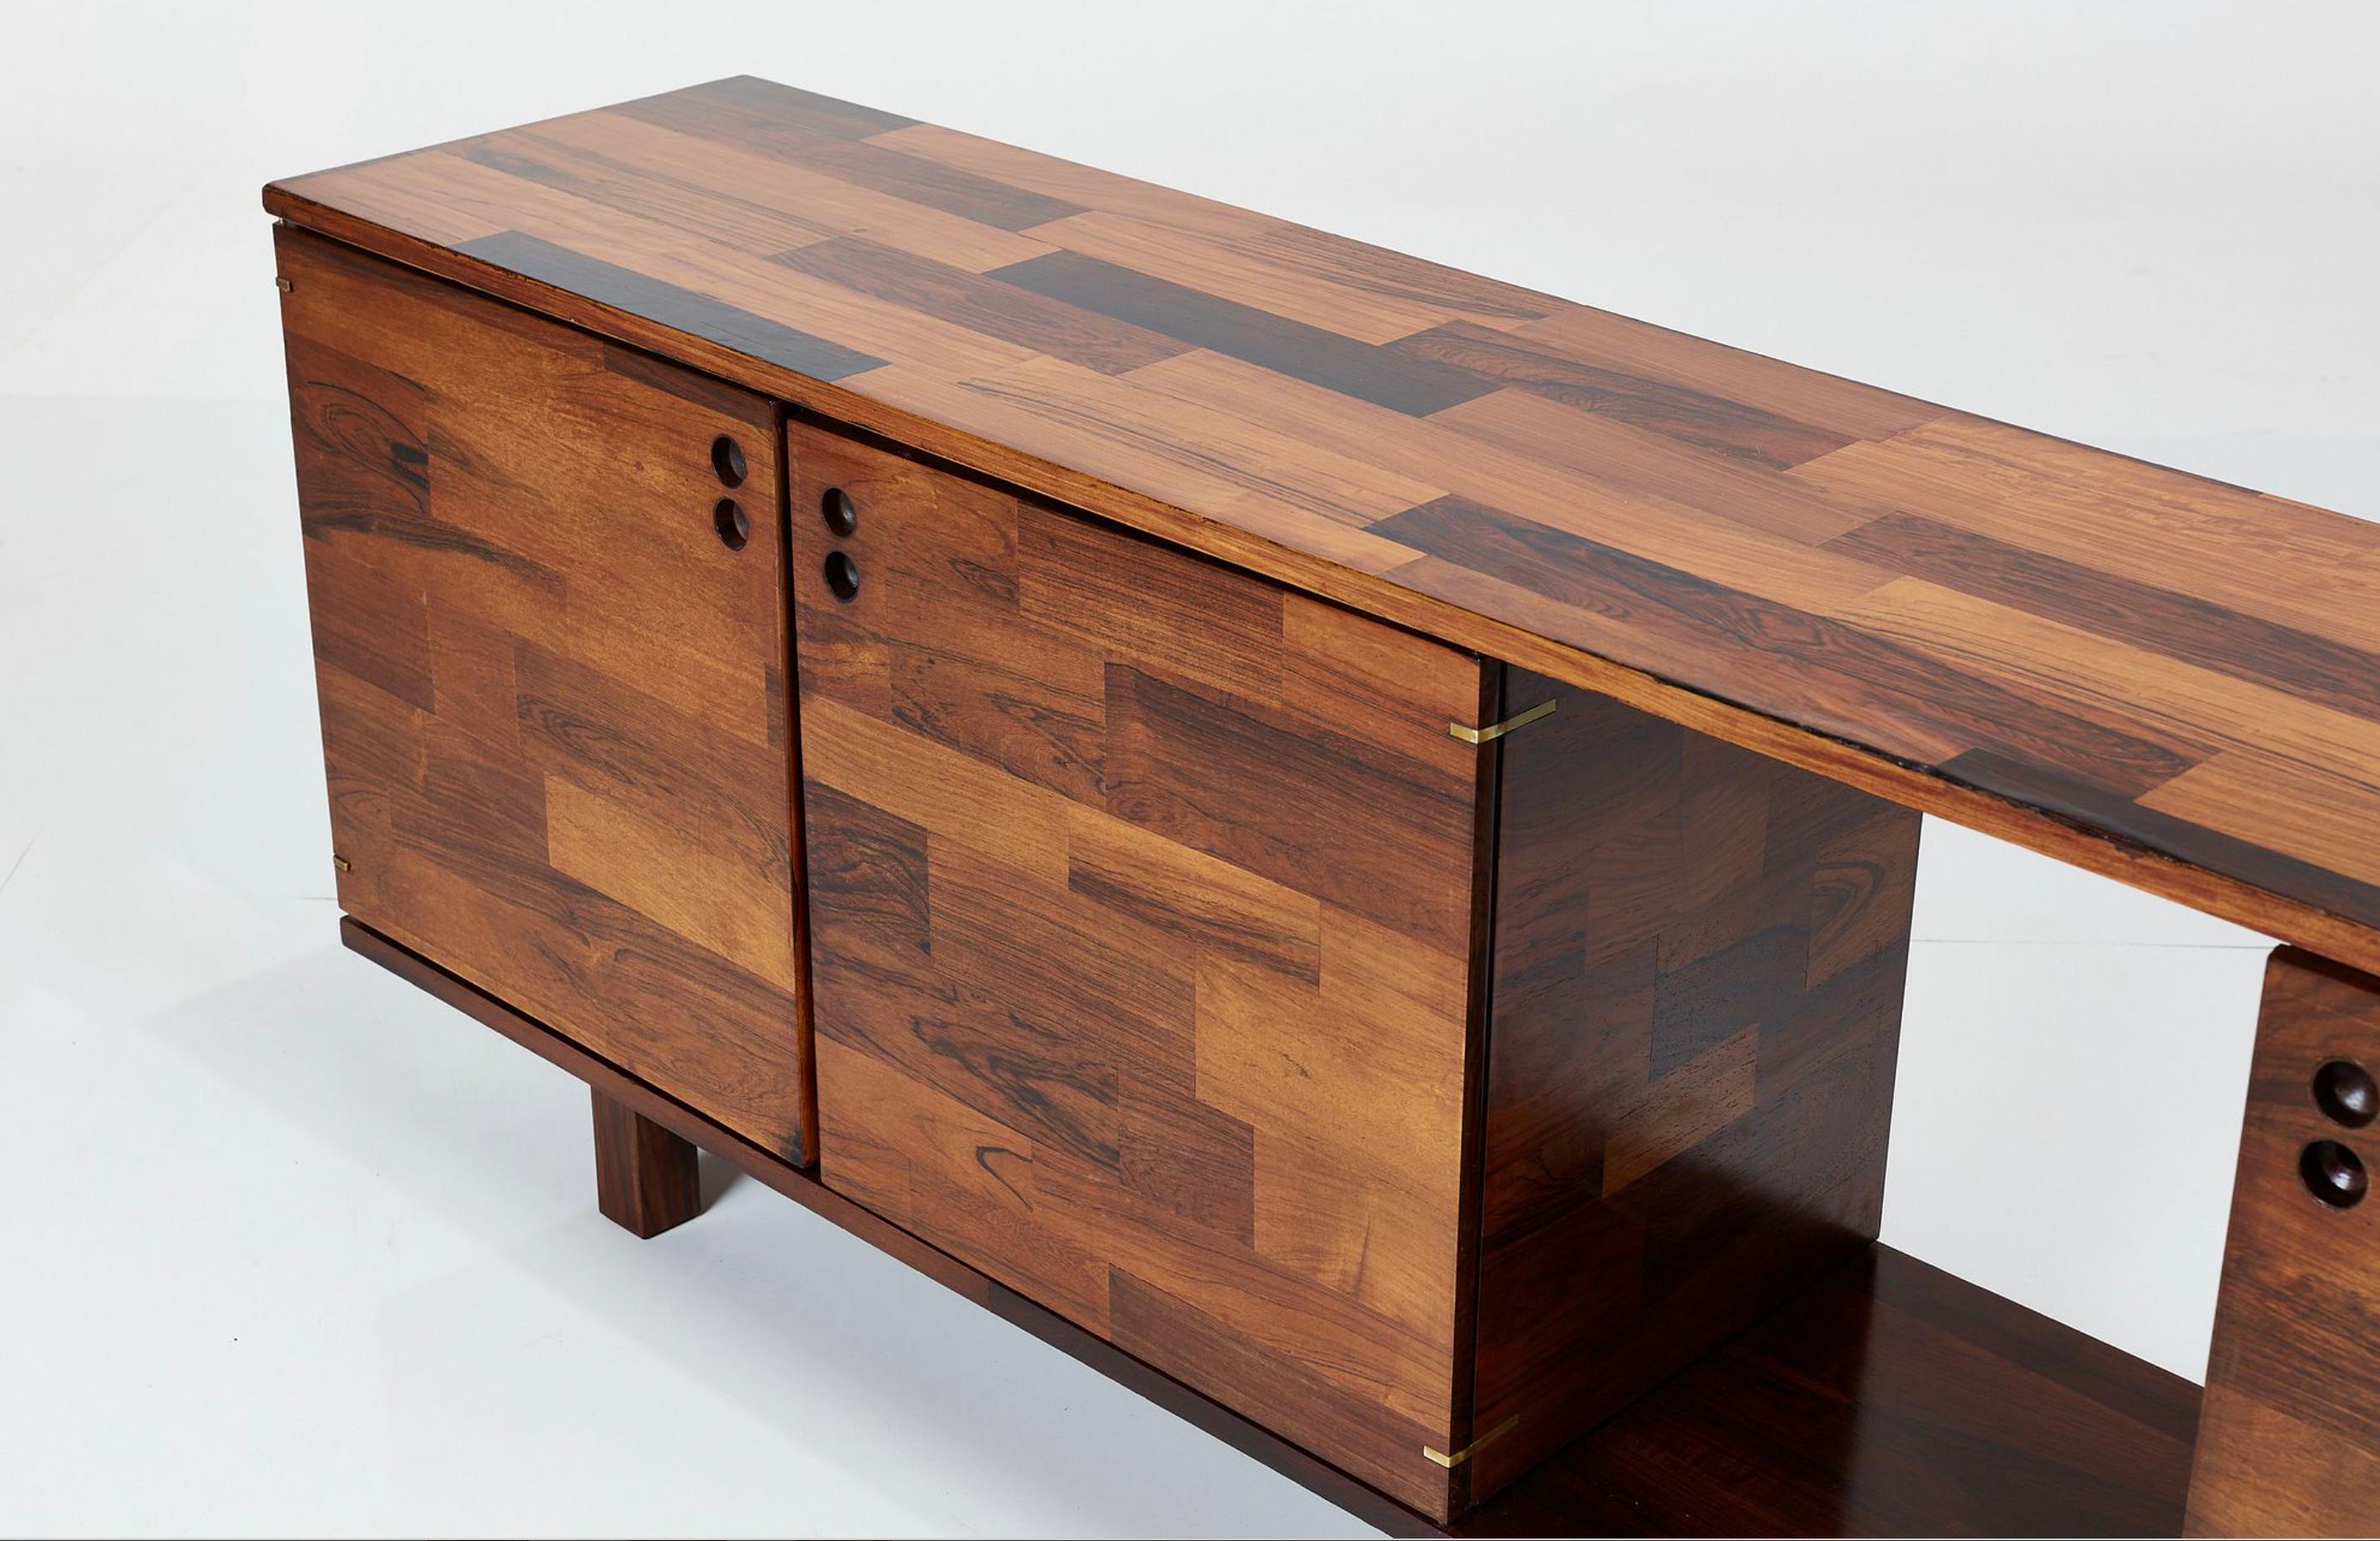 Patchwork Jorge Zalszupin Rosewood Mid-Century Credenza for L'Atelier, Brazil, 1960s For Sale